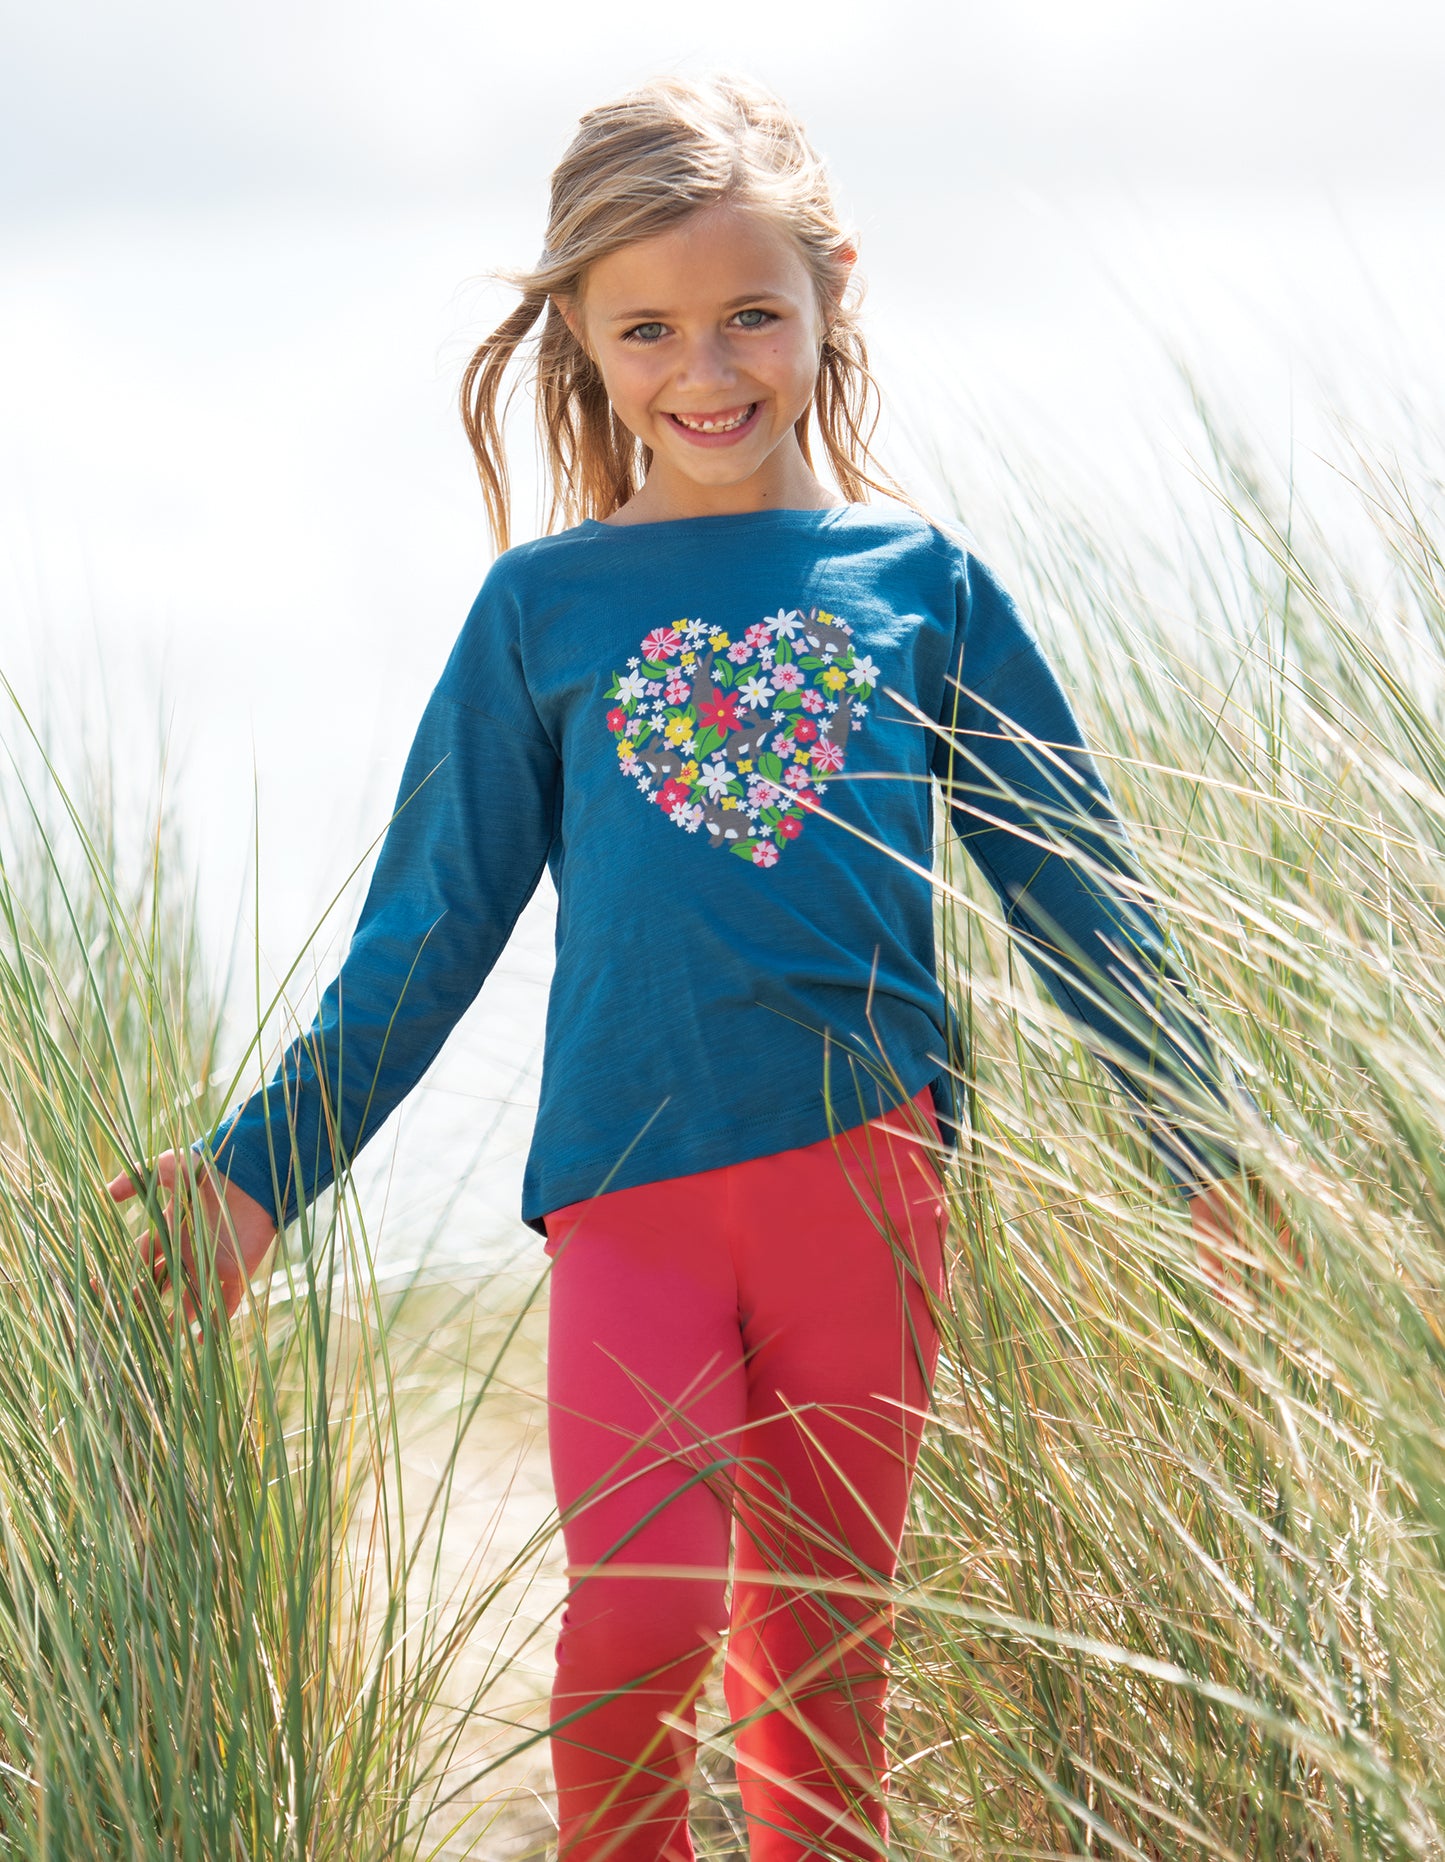 Frugi Libby leggings in watermelon colour. Made from organic cotton.